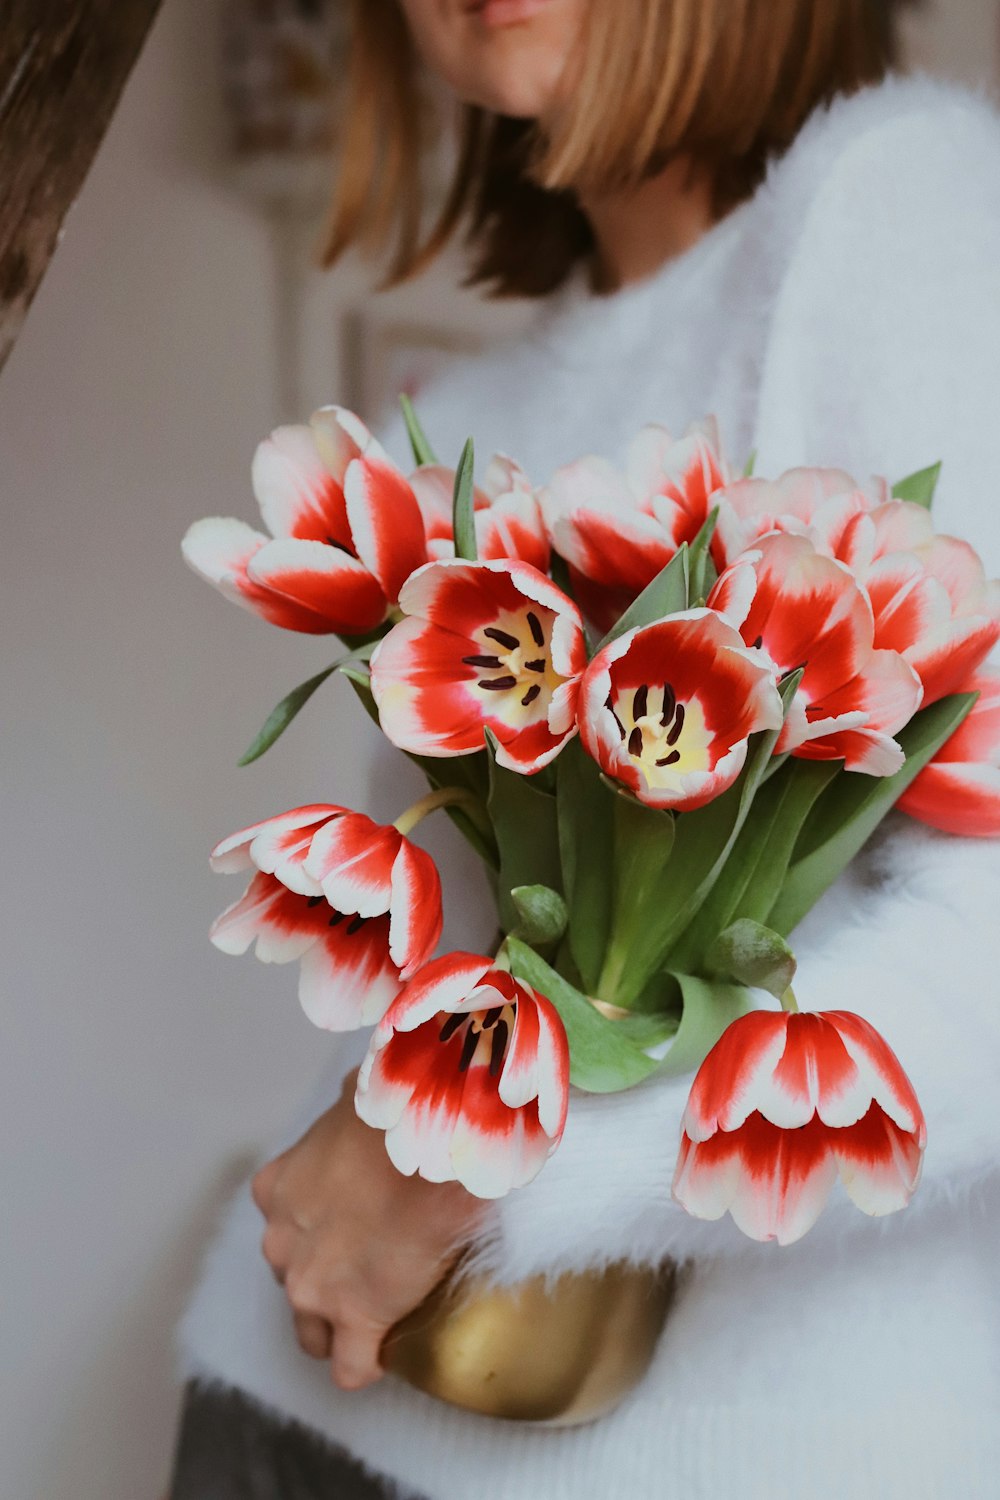 a woman holding a bouquet of red and white tulips